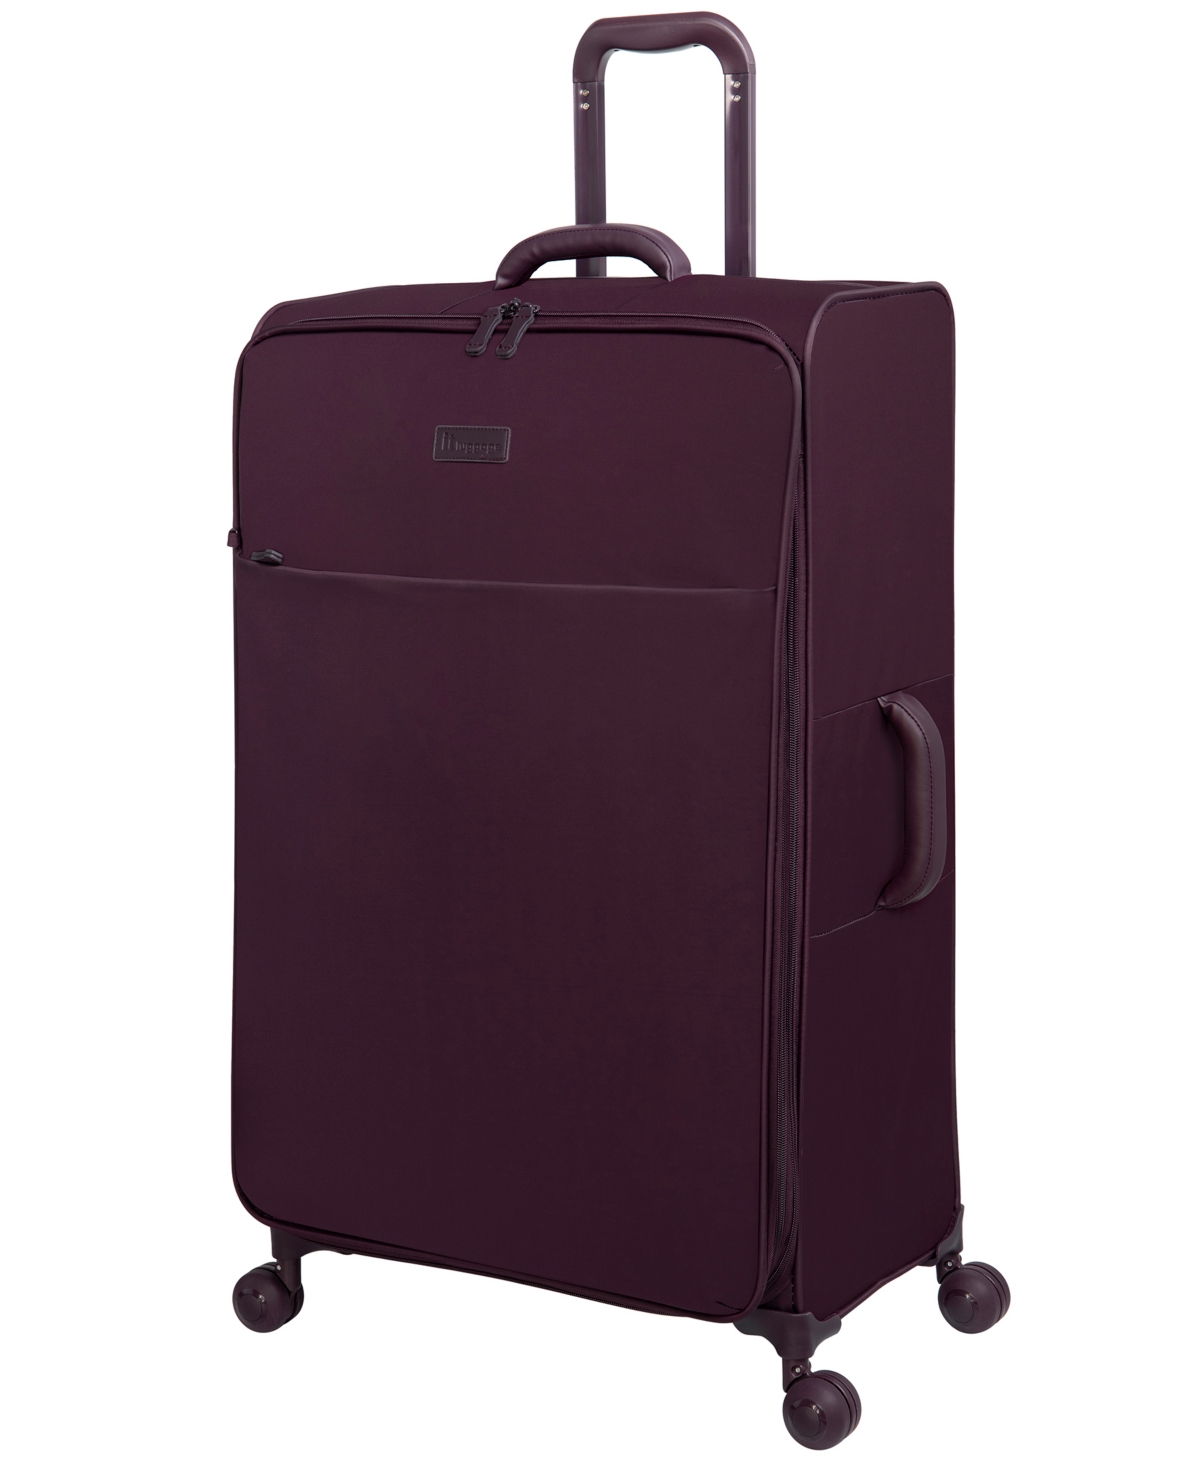 IT LUGGAGE LUSTROUS 25" SOFTSIDE CHECKED 8-WHEEL SPINNER